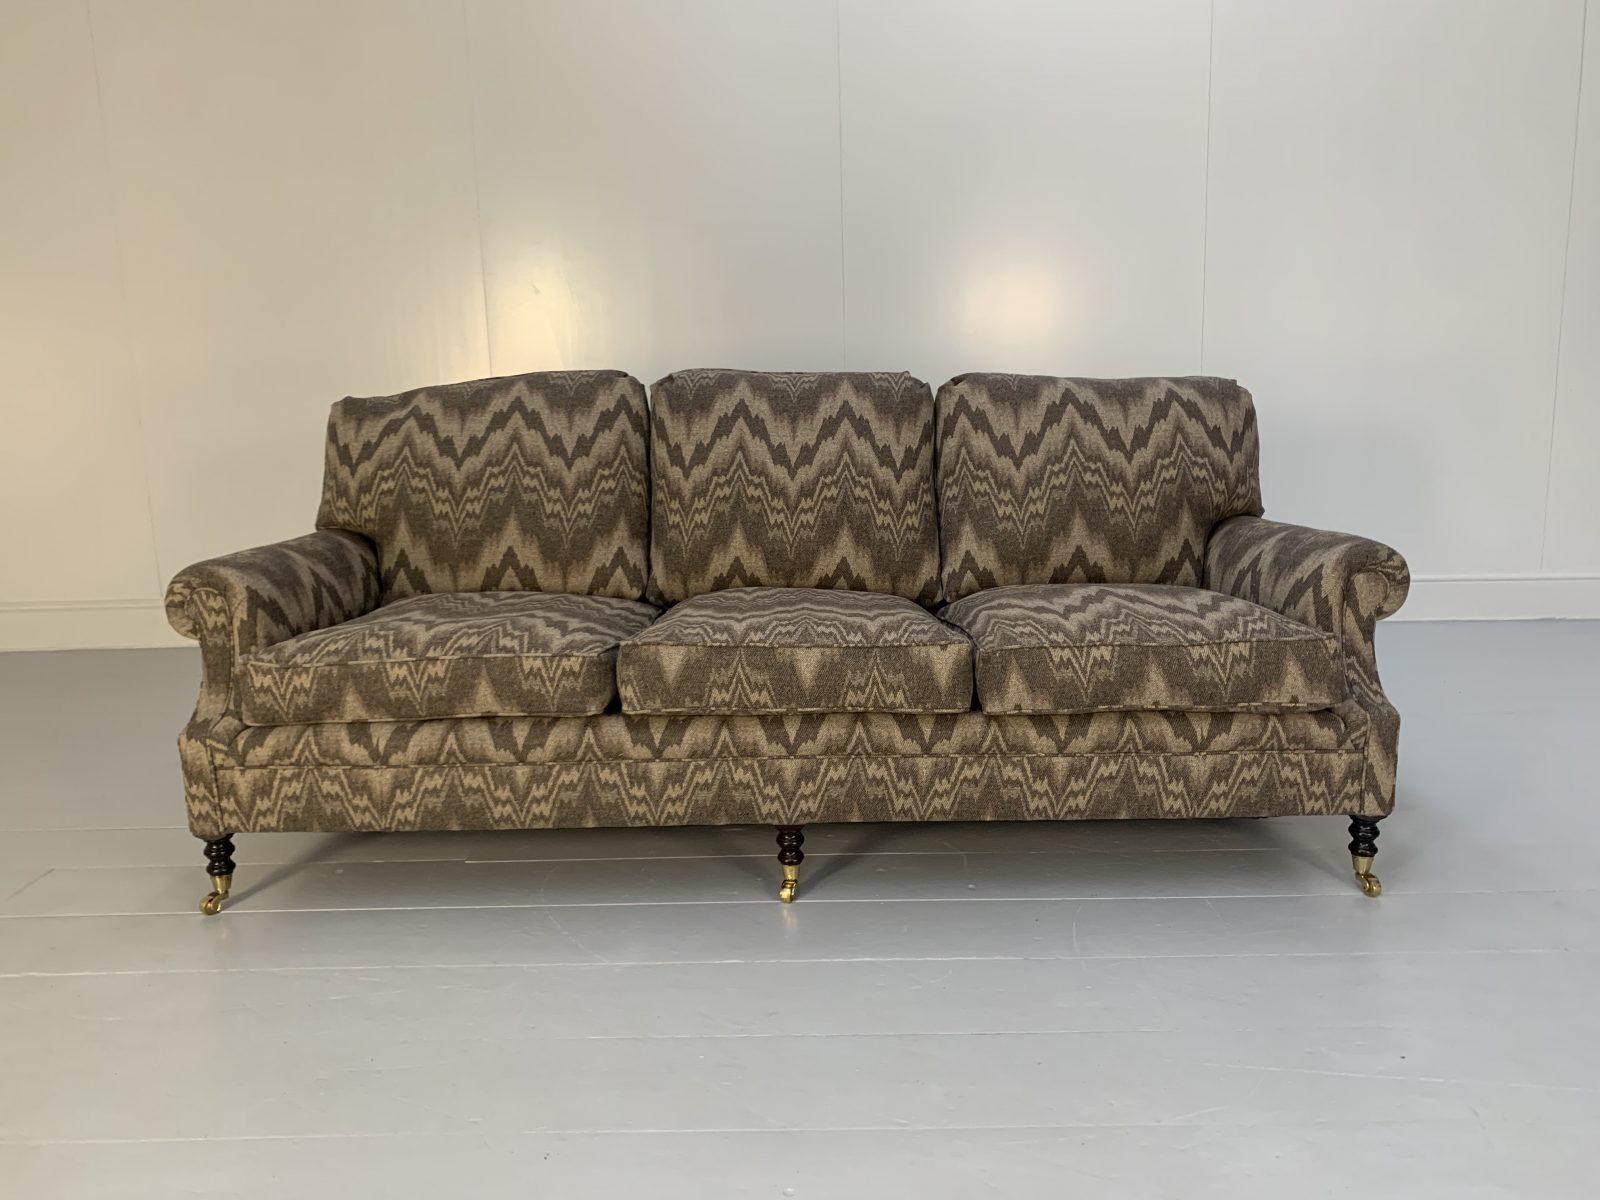 Hello Friends, and welcome to another unmissable offering from Lord Browns Furniture, the UK’s premier resource for fine Sofas and Chairs.
On offer on this occasion is, quite possibly, the only sofa you might ever need to buy.
This is an ultra-rare